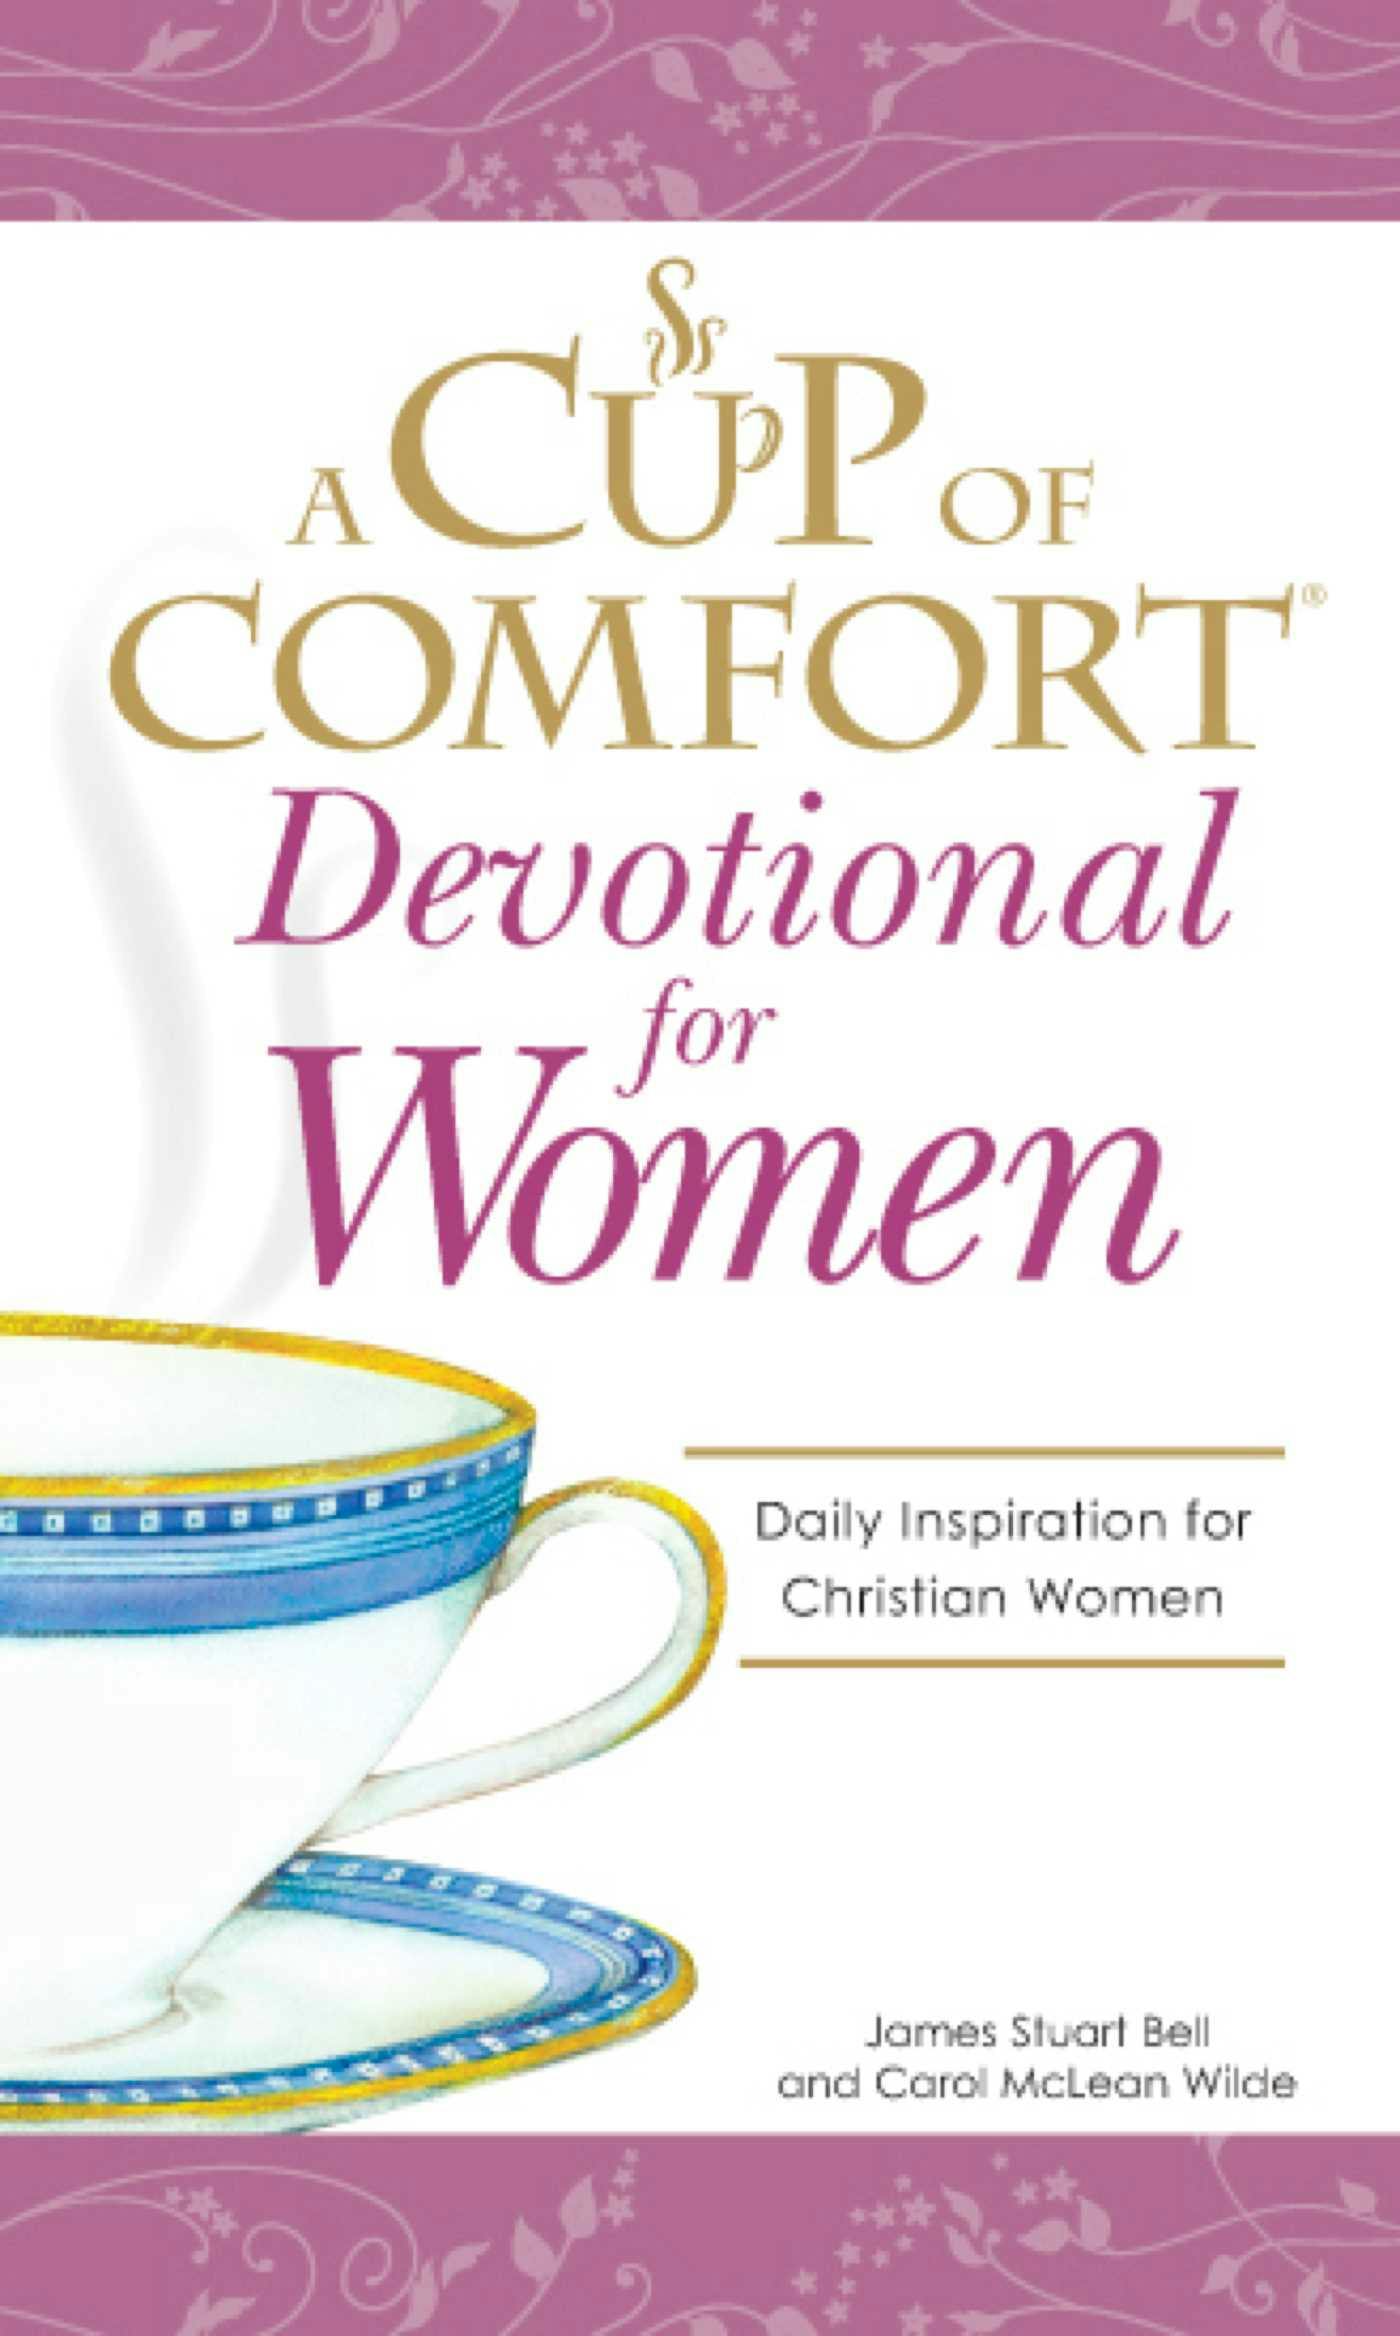 A Cup of Comfort Devotional for Women: A daily reminder of faith for Christian women by Christian Women - undefined